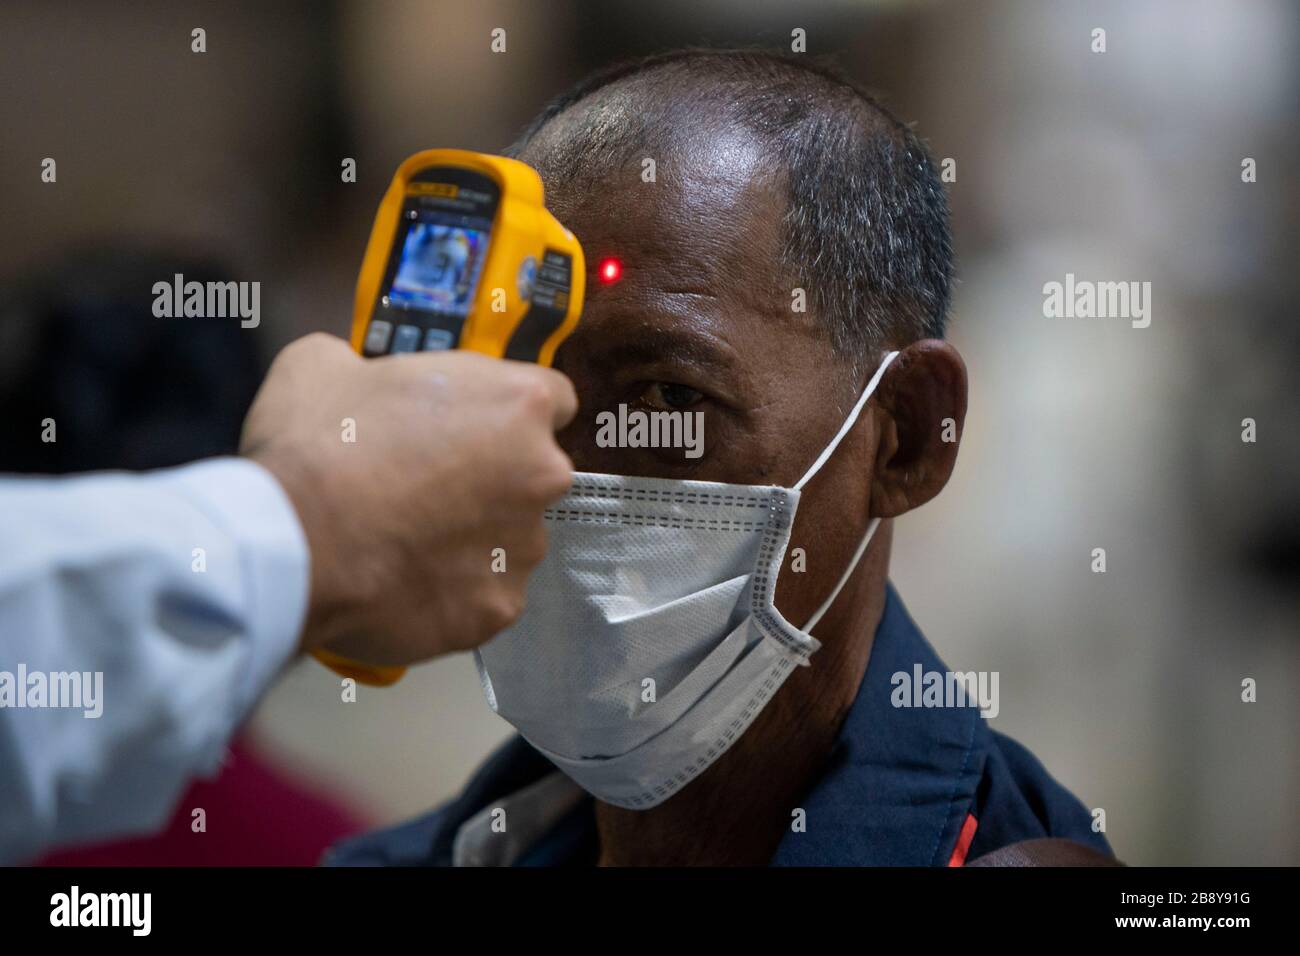 Bangkok, Bangkok, Thailand. 23rd Mar, 2020. A member of the public undergoes a temperature check before entering Bangkok's Mochit bus terminal. The travel hub was filled with thousands of travelers heading back to their home provinces after the city government ordered the mandatory closure of many nonessential businesses on March 22nd, 2020 in an effort to slow the spread of the Covid-19 virus. Large portions of the capital's workforce live paycheck to pay check, making staying in the city financially impossible due to their sudden lack of employment. Credit: ZUMA Press, Inc./Alamy Live News Stock Photo